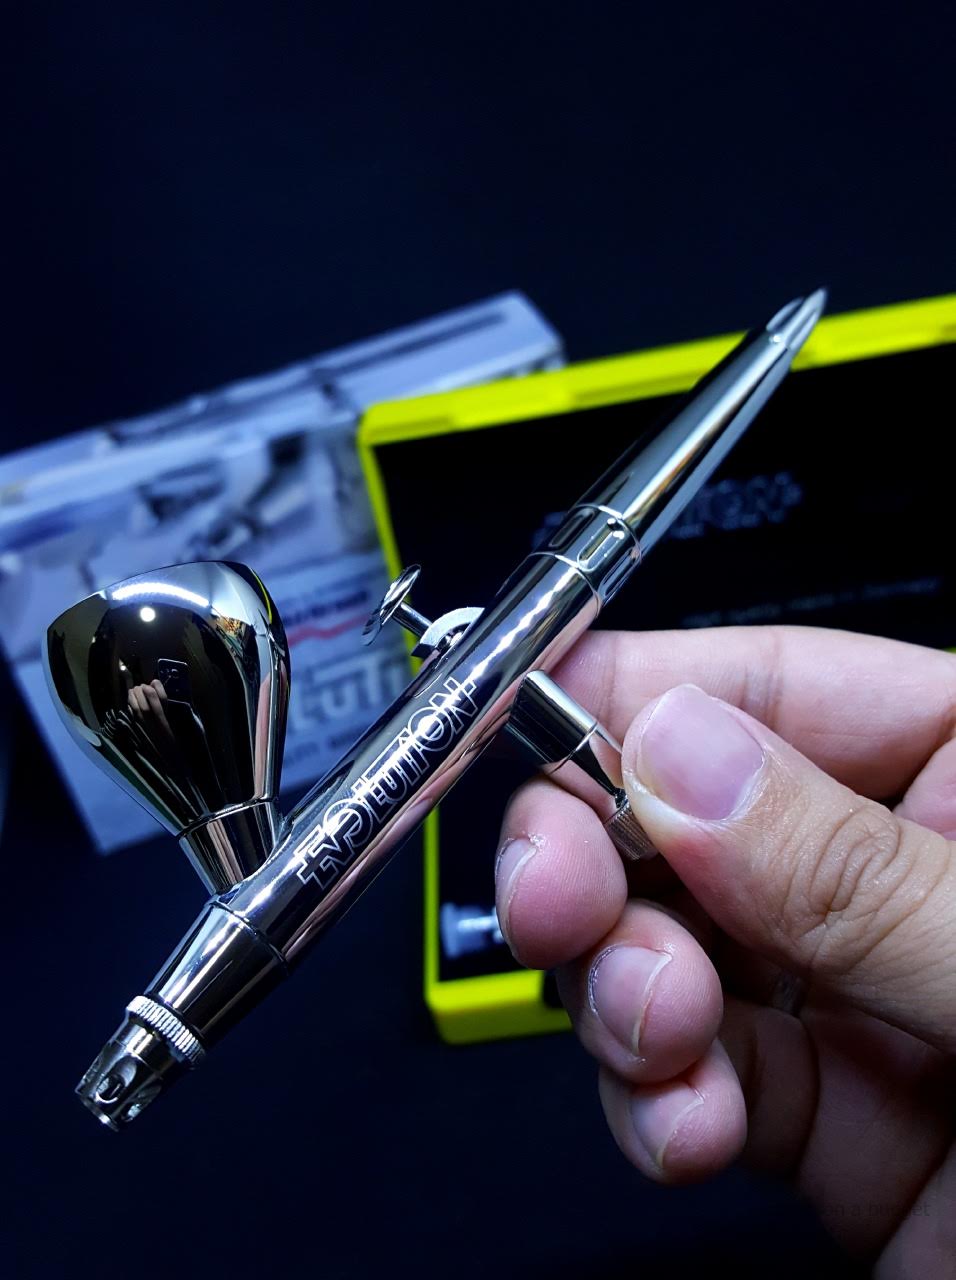 Evolution - Silverline fPc Two in One Airbrush, Harder Steenbeck — Midwest  Airbrush Supply Co